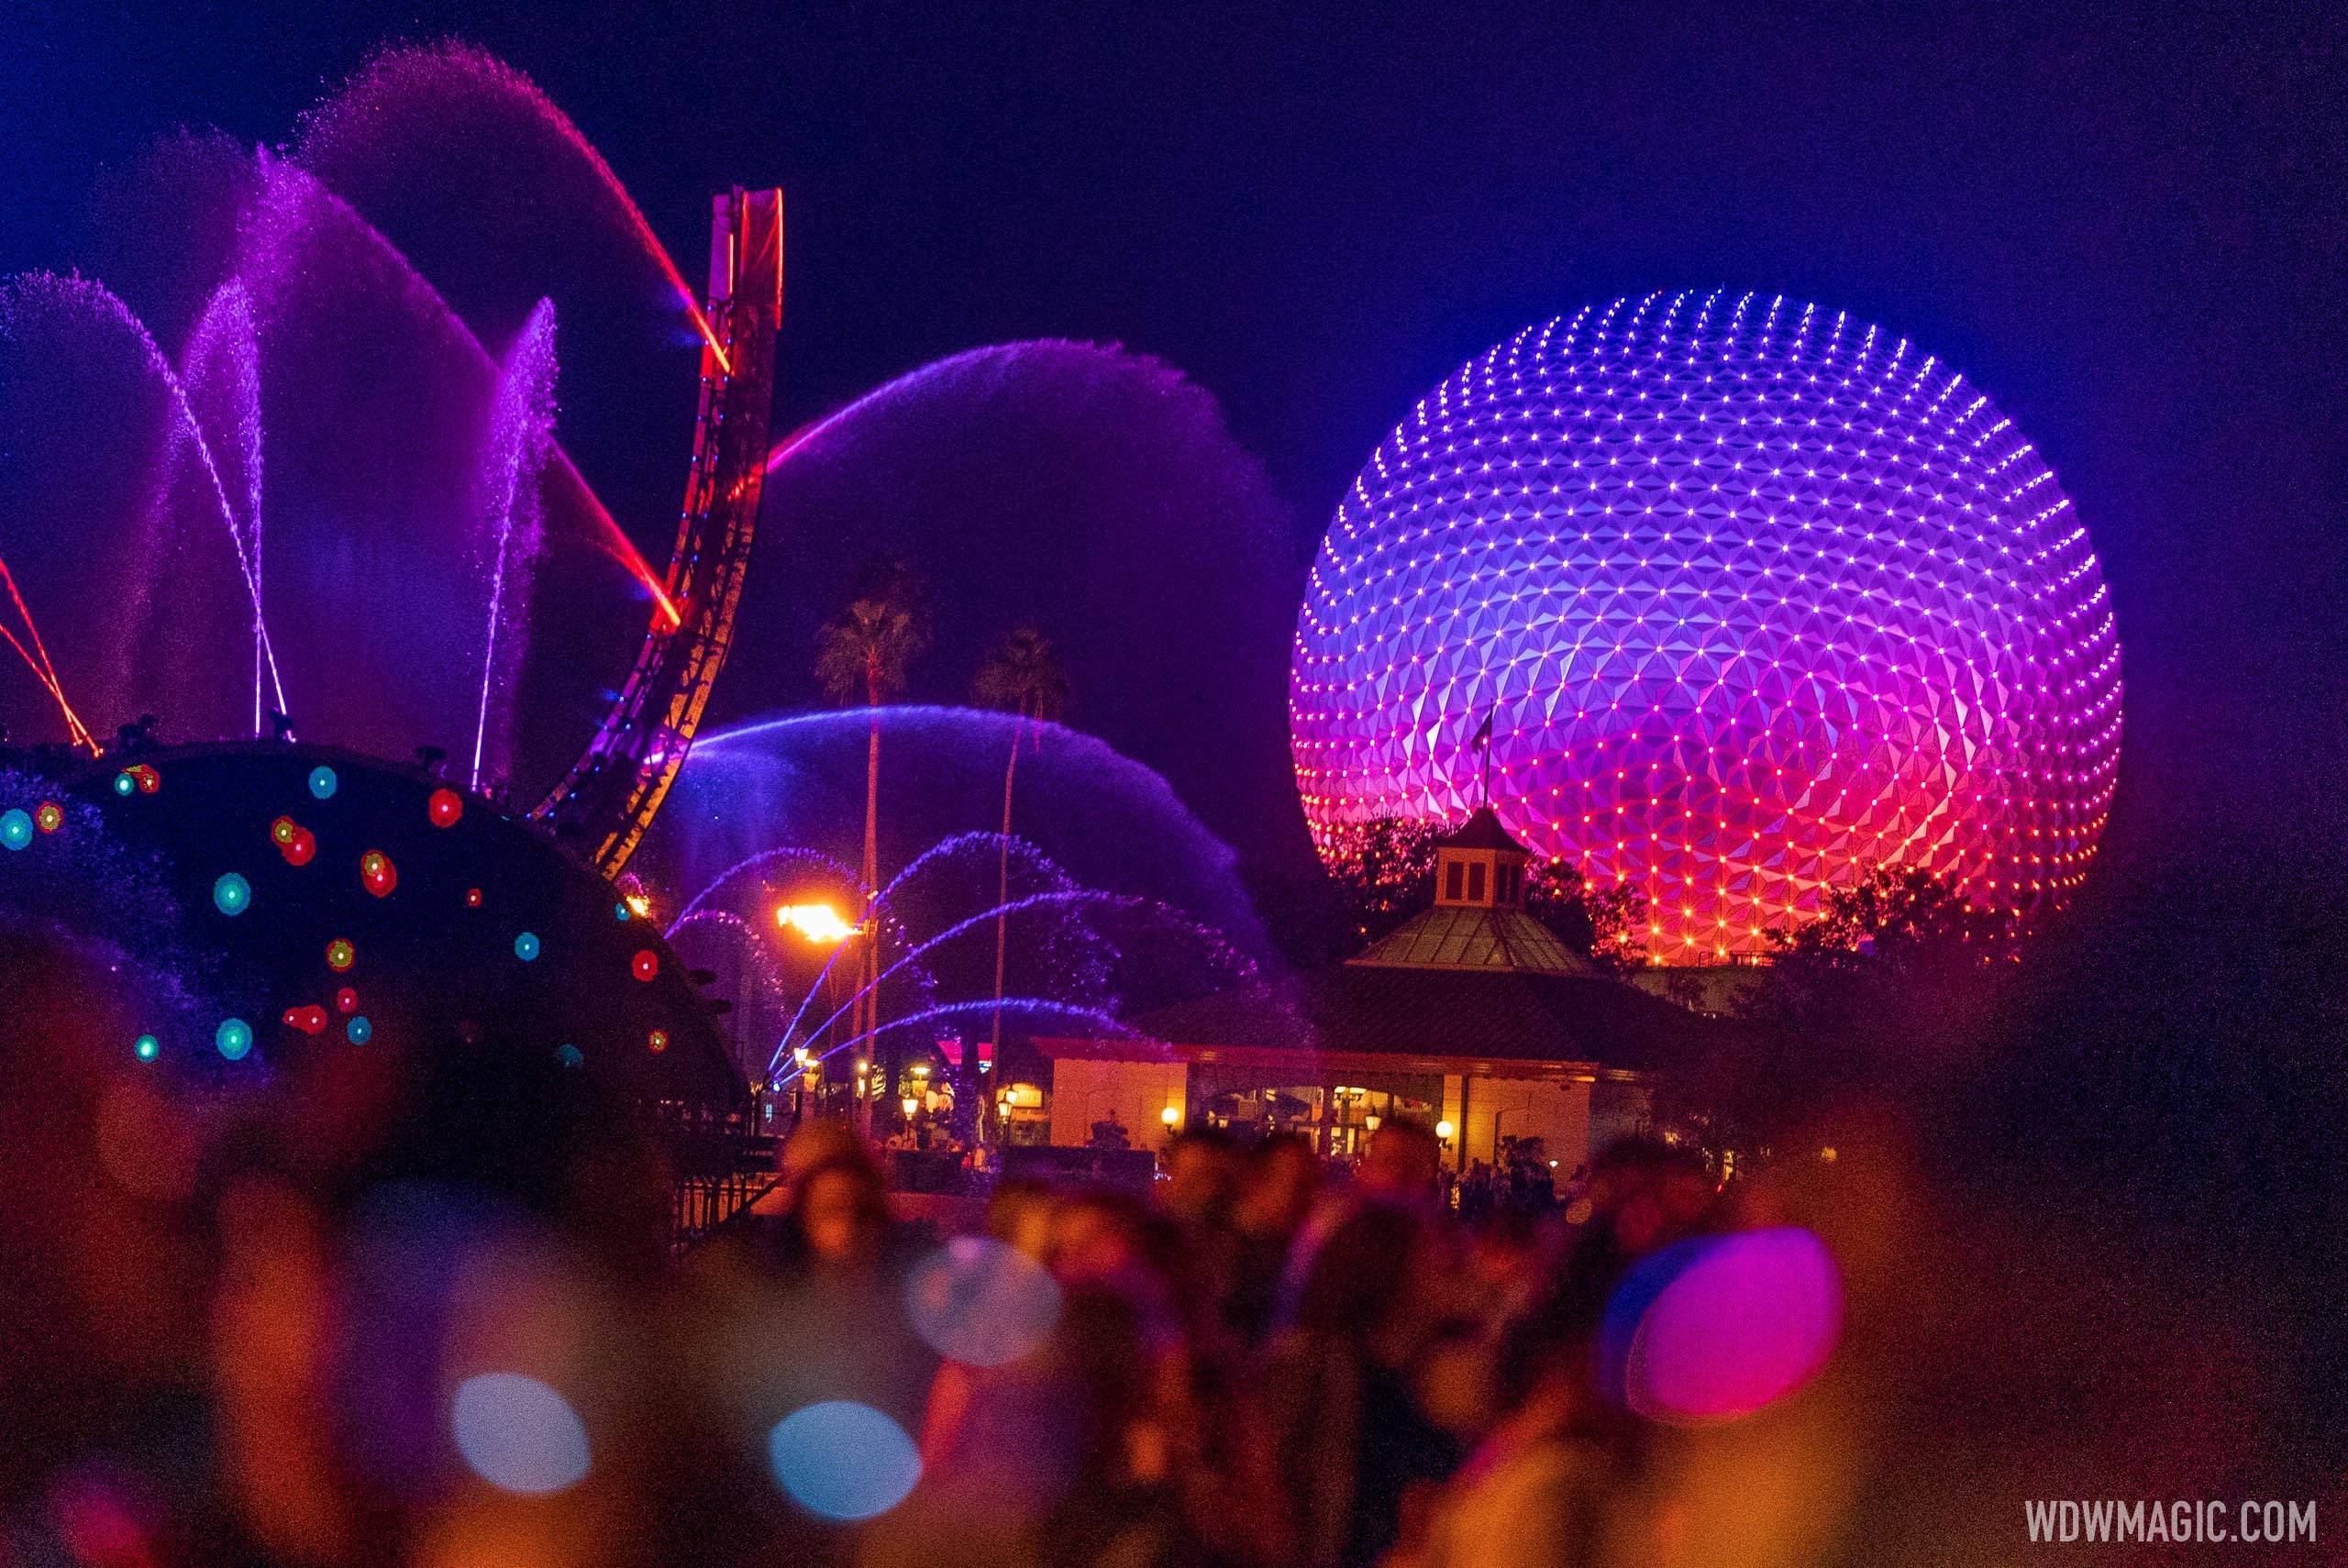 Disney After Hours events across all Walt Disney World parks now sold out